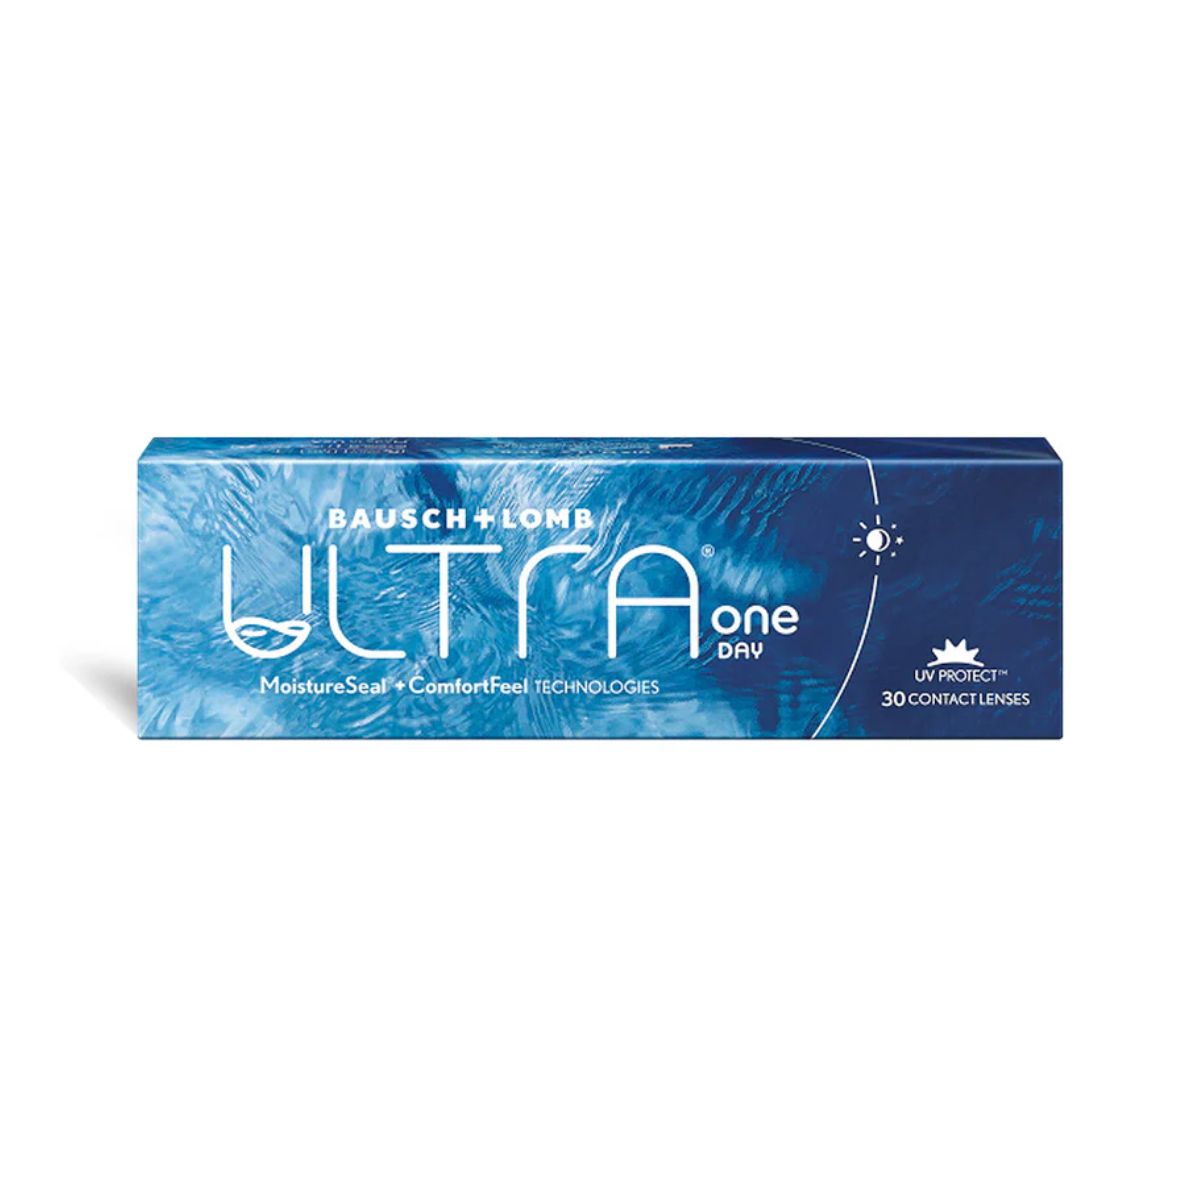 "Bausch & Lomb Ultra One Day Daily Disposable Contact Lens 30 Lens Pack optorium"